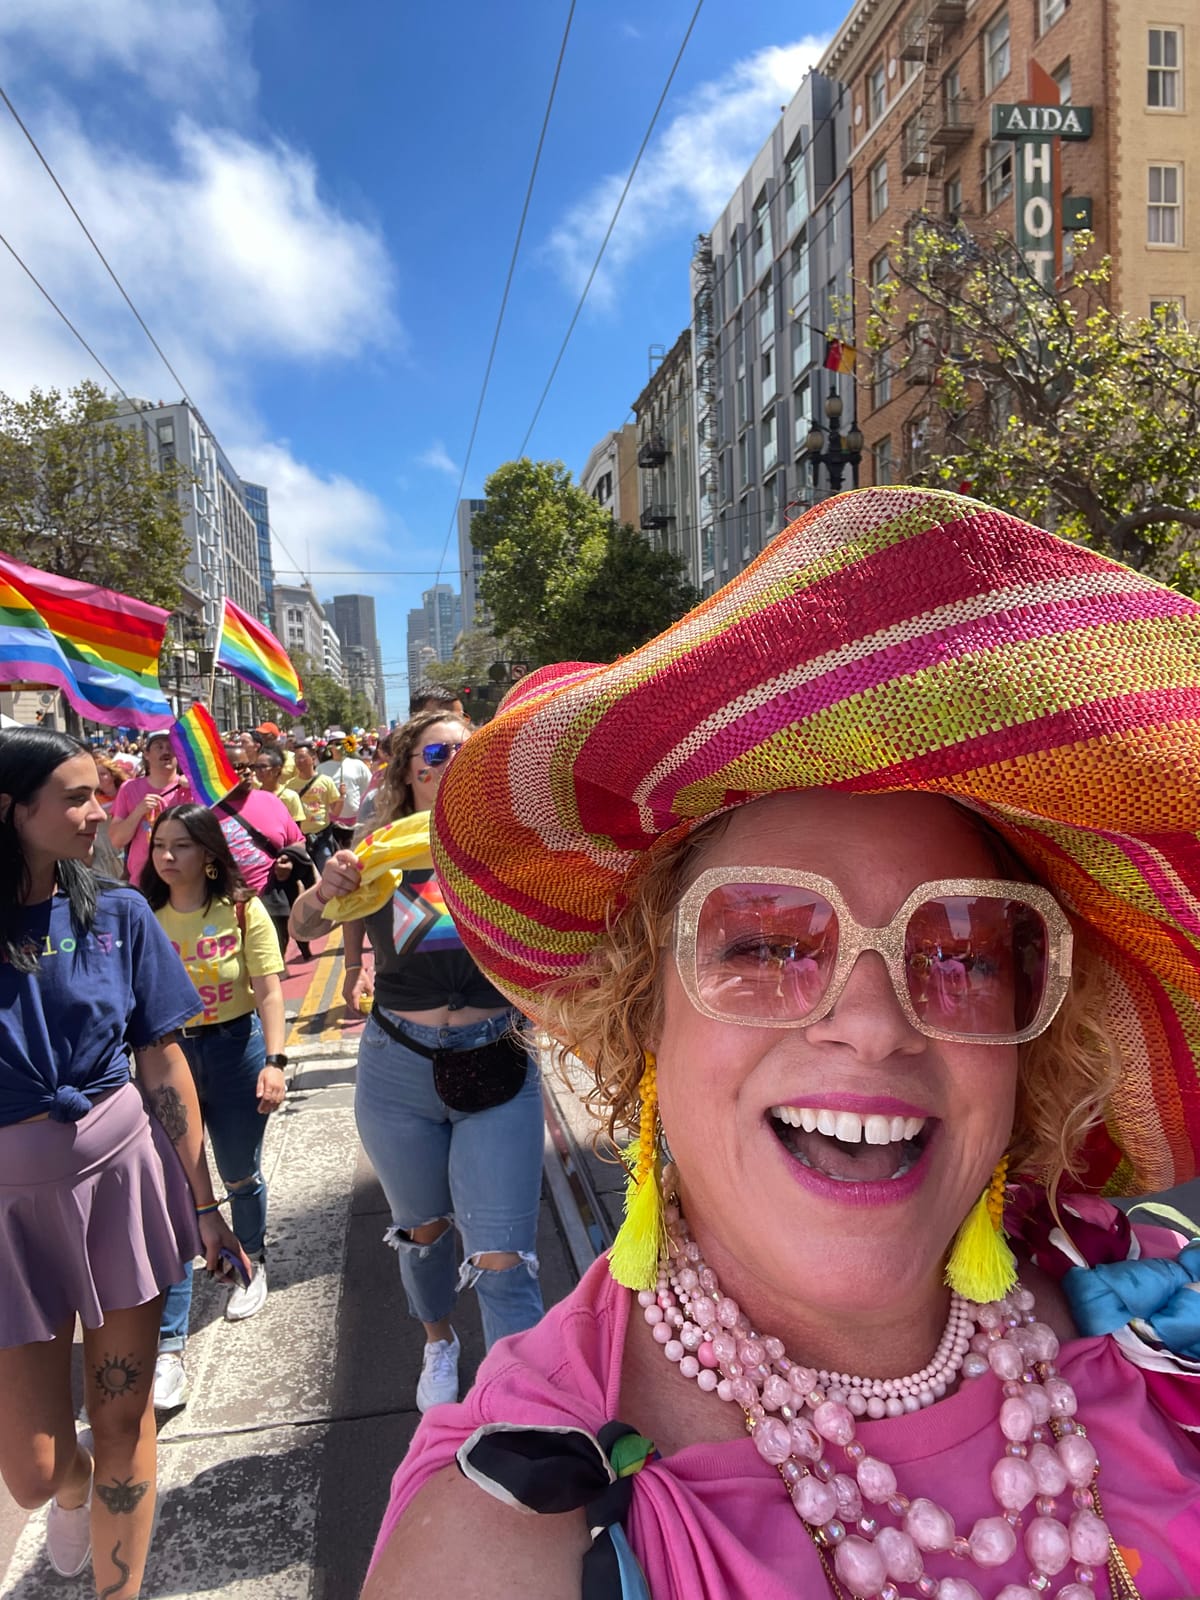 https://www.tablehopper.com/content/images/size/w1200/assets_c/2022/07/pridesunday-2022-thumb-160xauto-14462.jpg